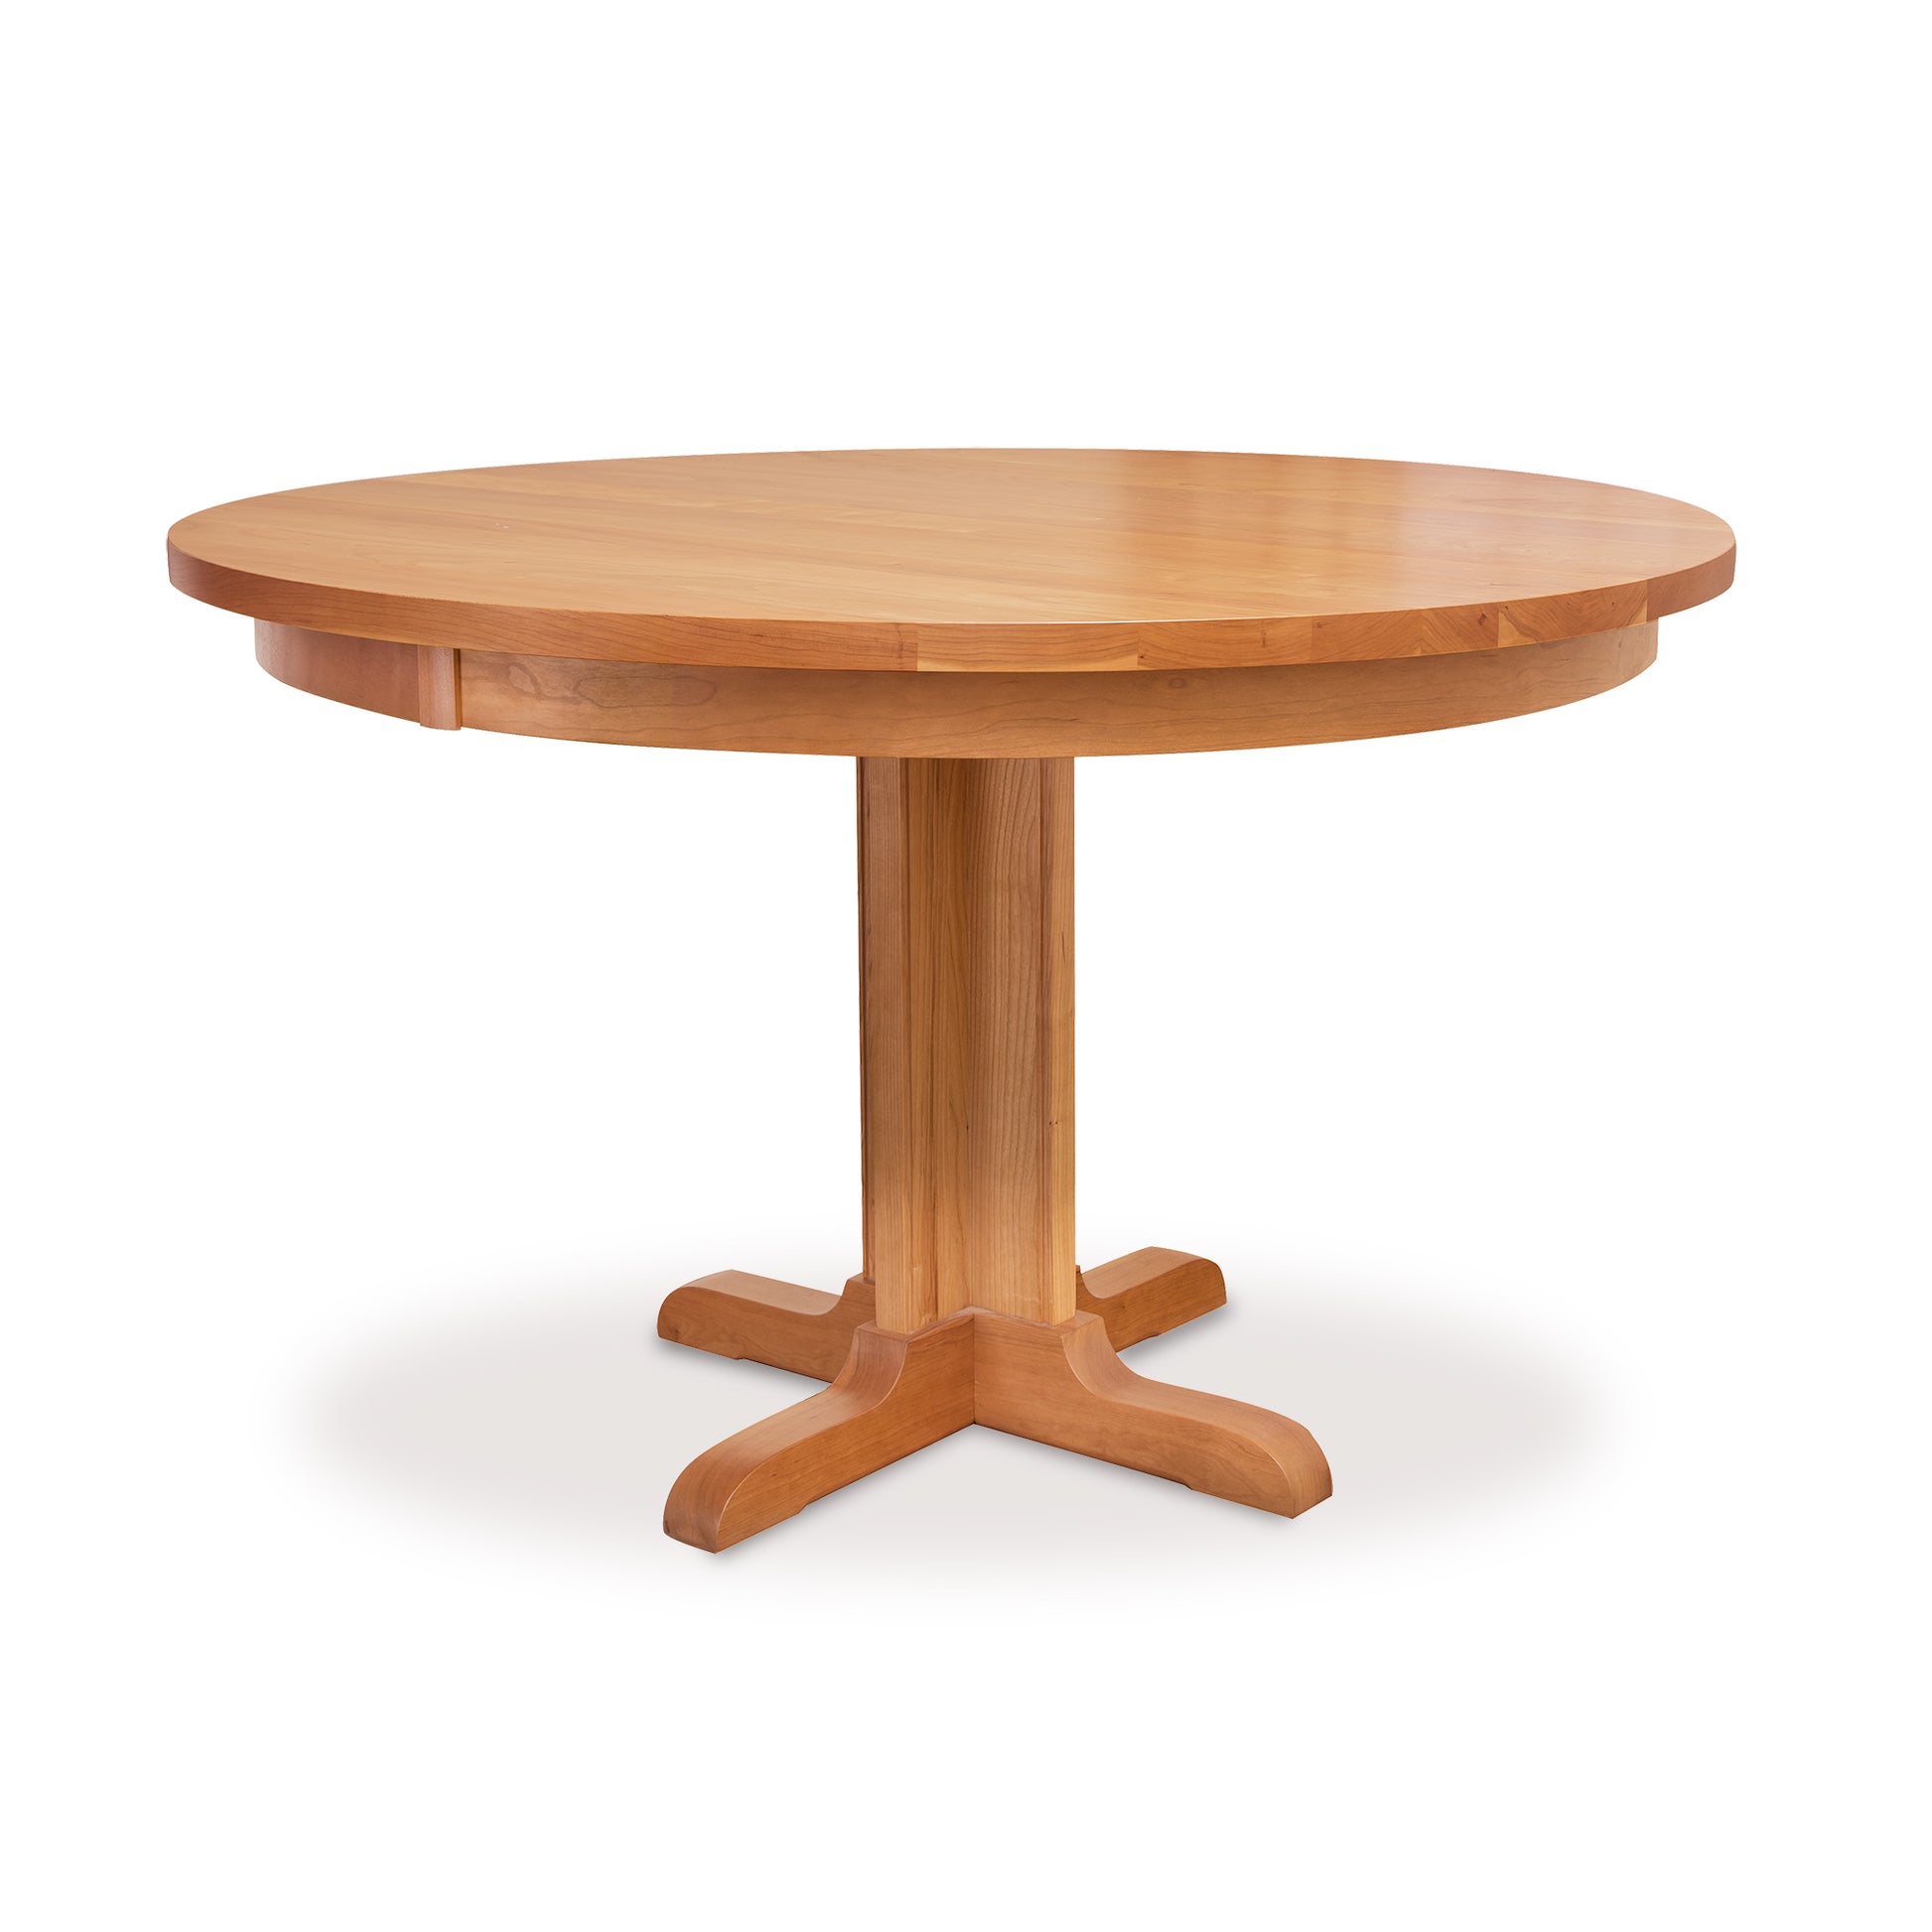 A sturdy, Lyndon Furniture single-leg round pedestal table with a wooden base.